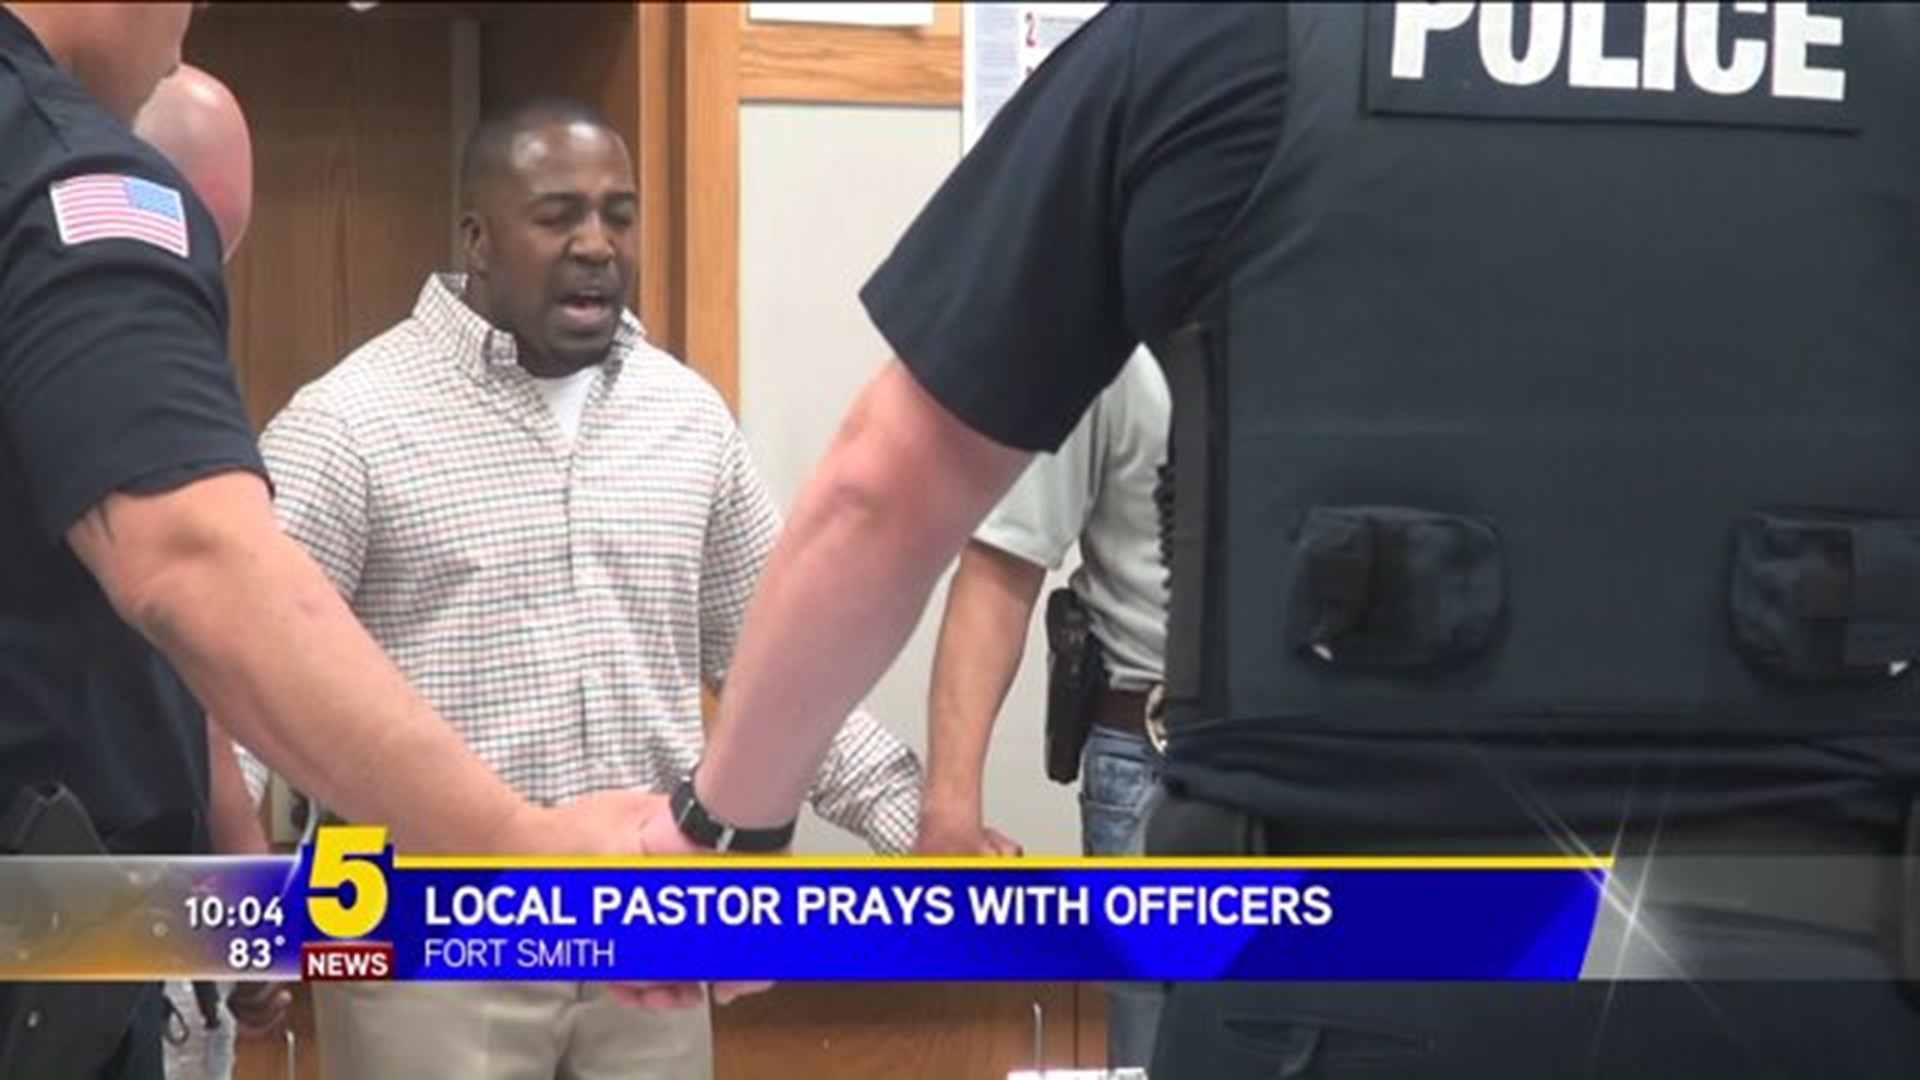 Local Pastor Prays With Officers